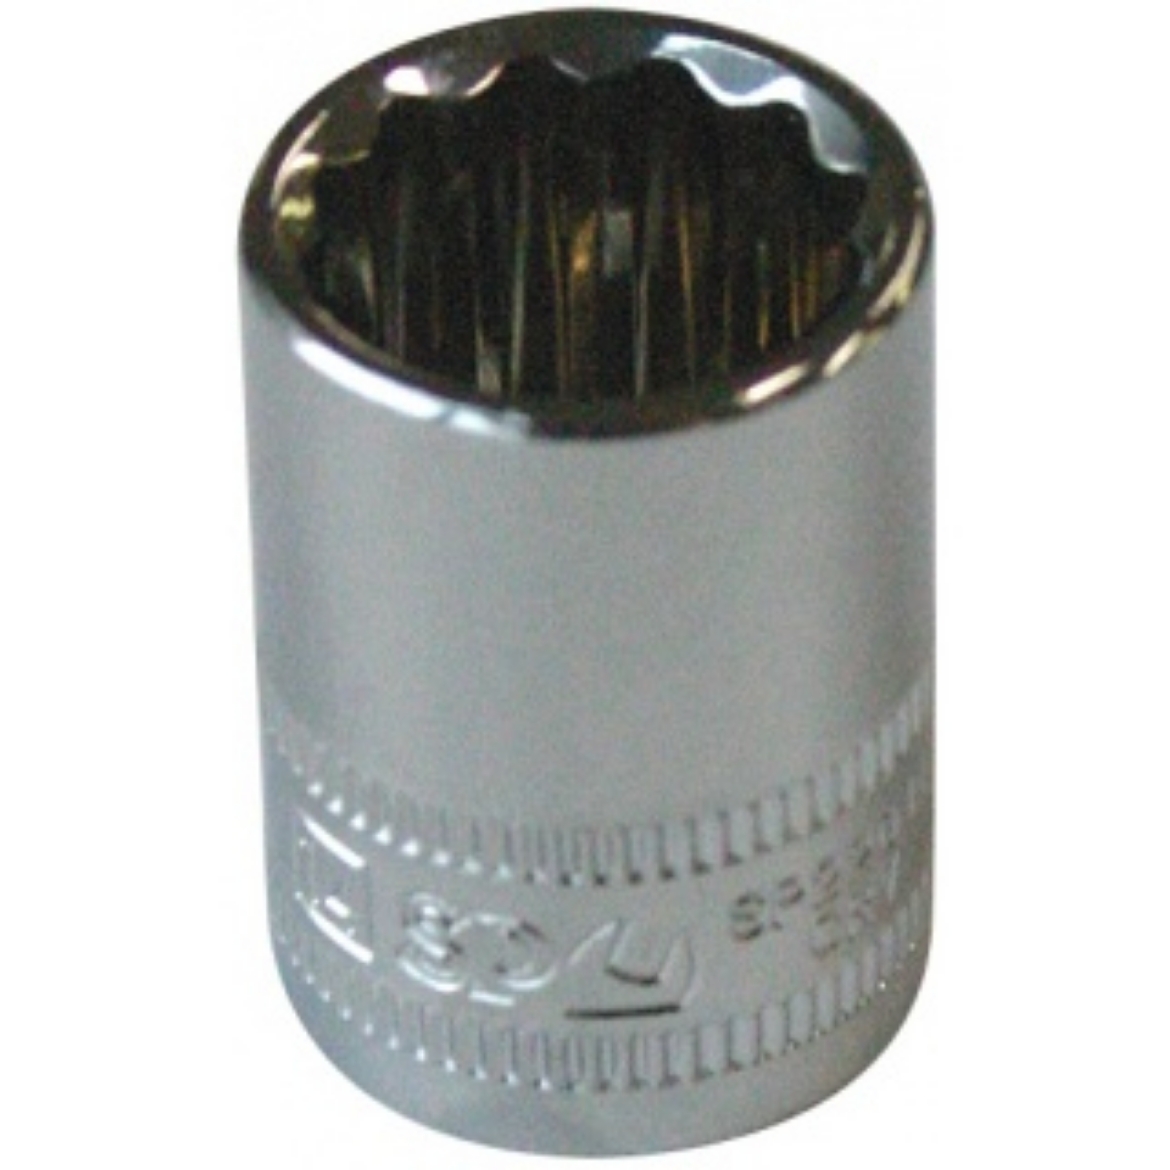 Picture of SOCKET 3/8"DR 12PT METRIC 9MM SP TOOLS